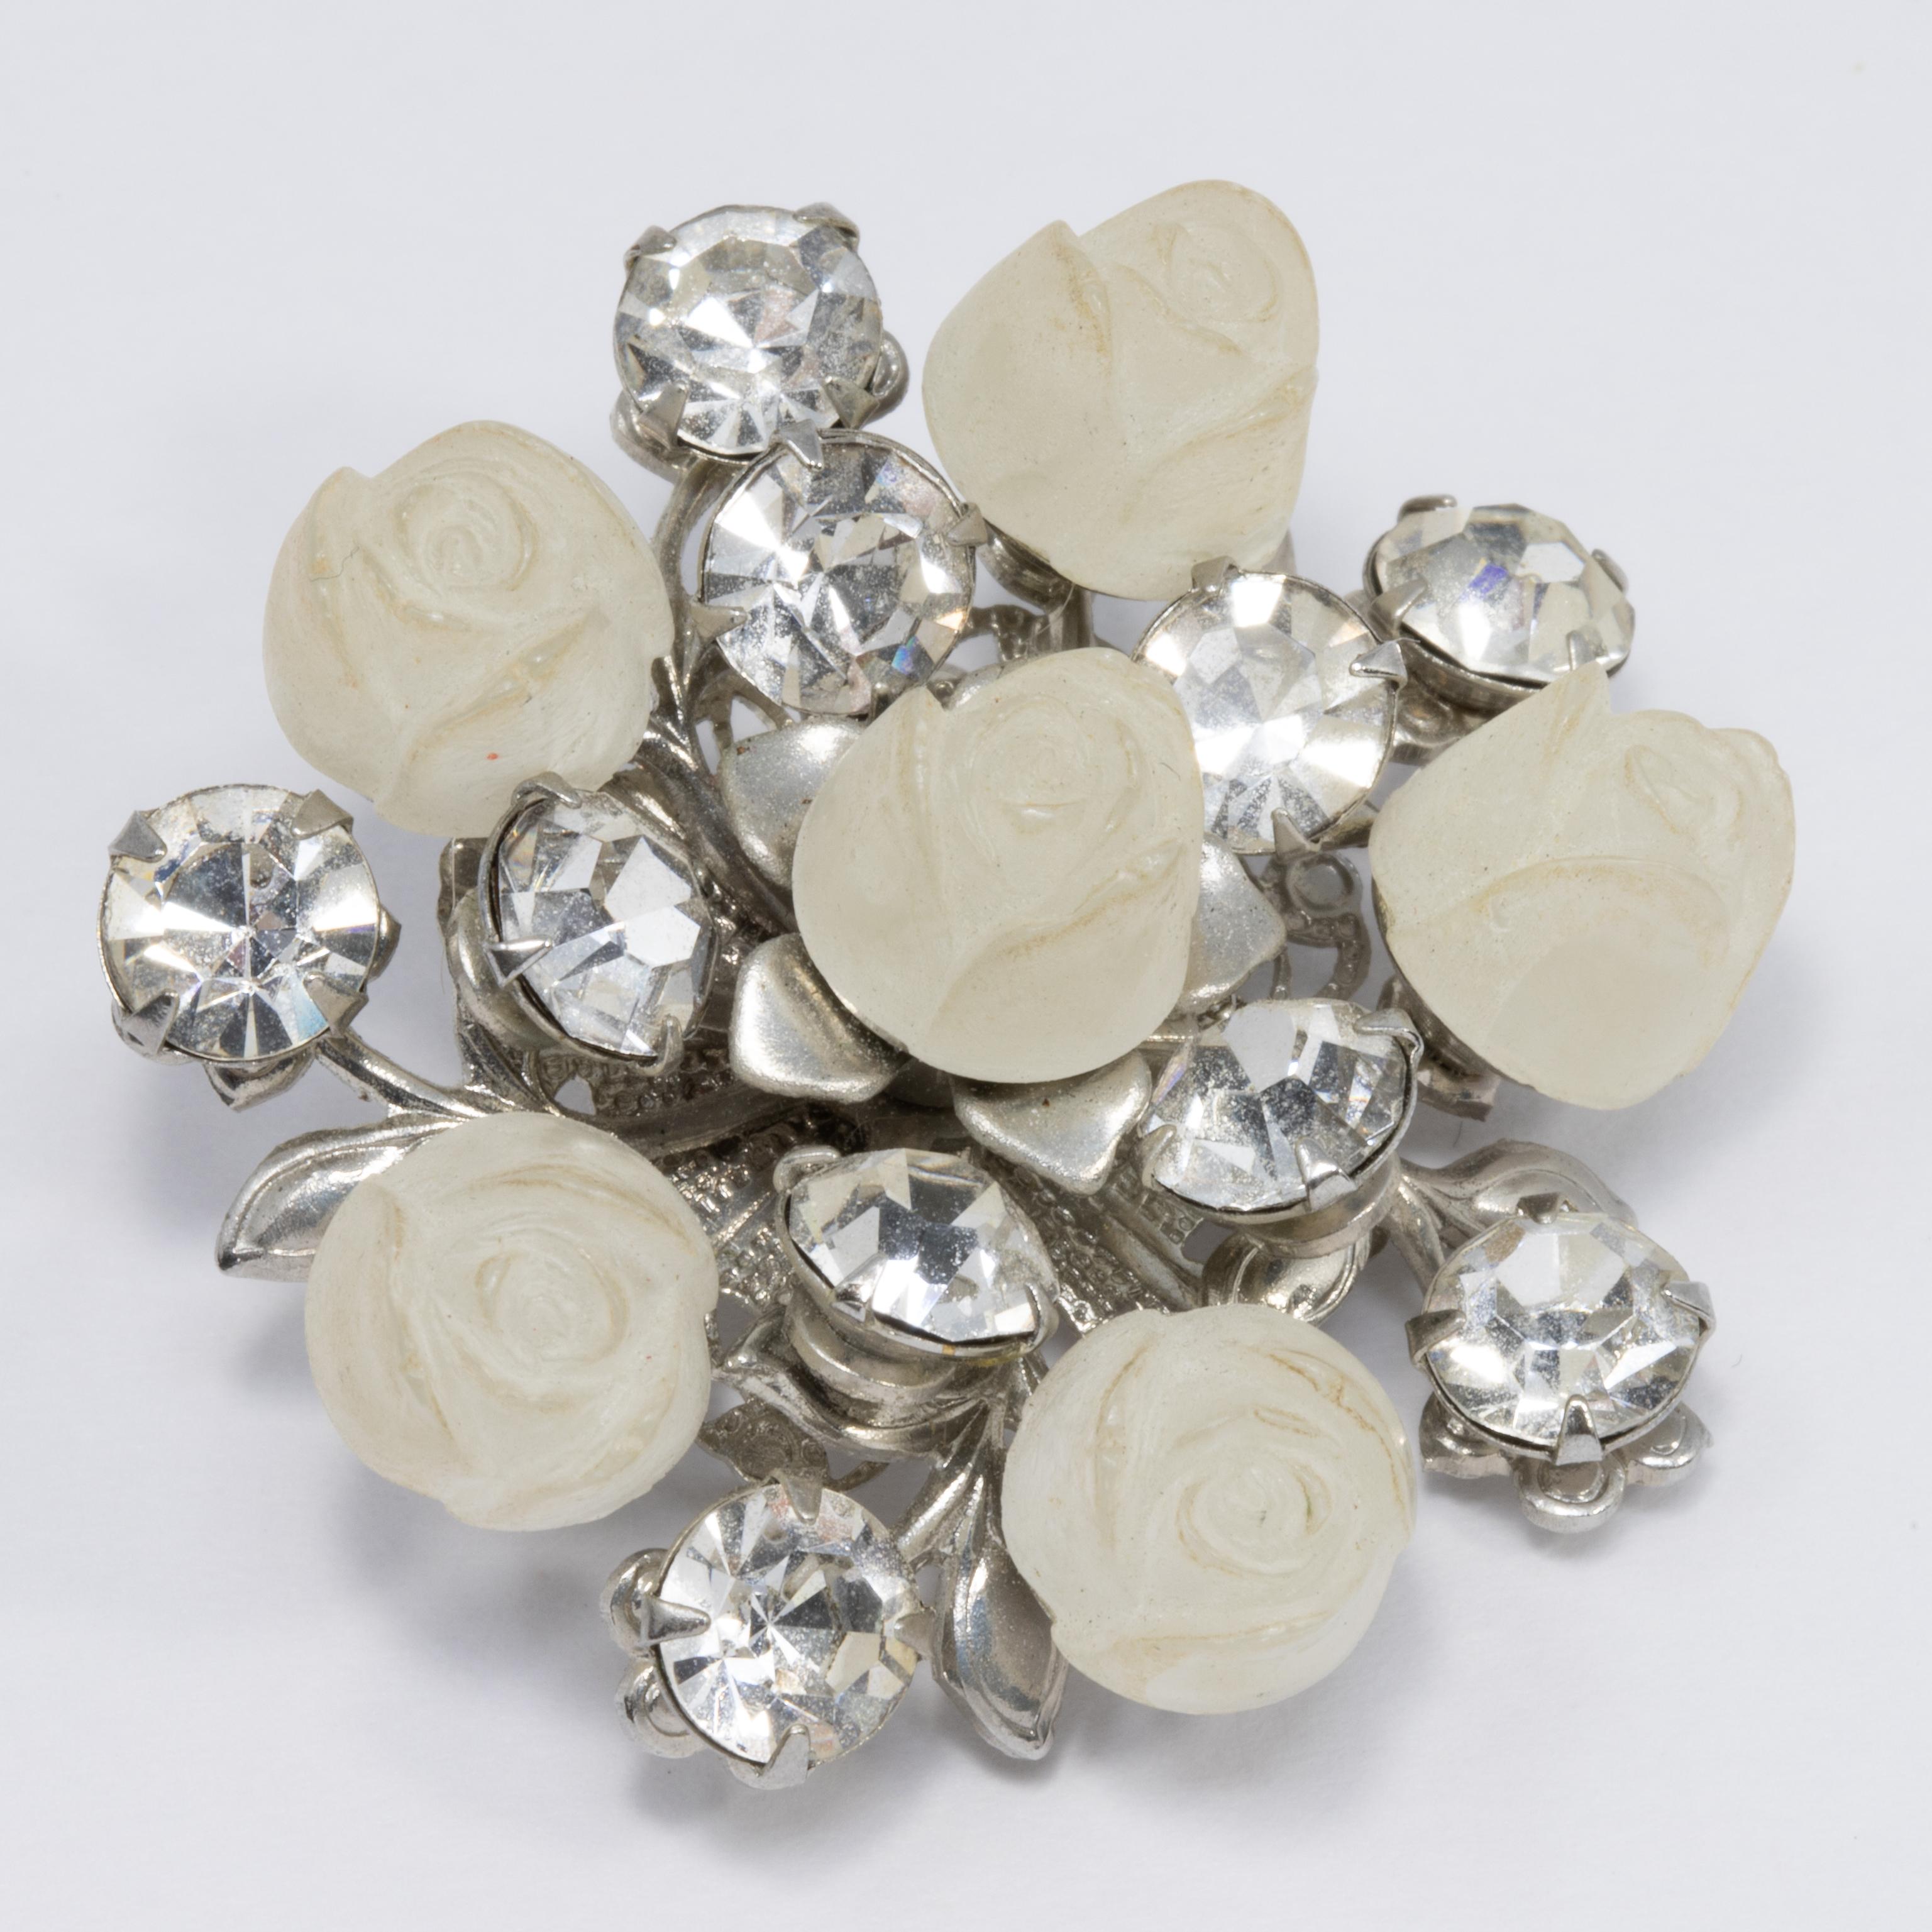 Exquisite carved frosted white roses accented with crystals, set in a floral-themed silvertone metal setting. A delightful vintage pin!
